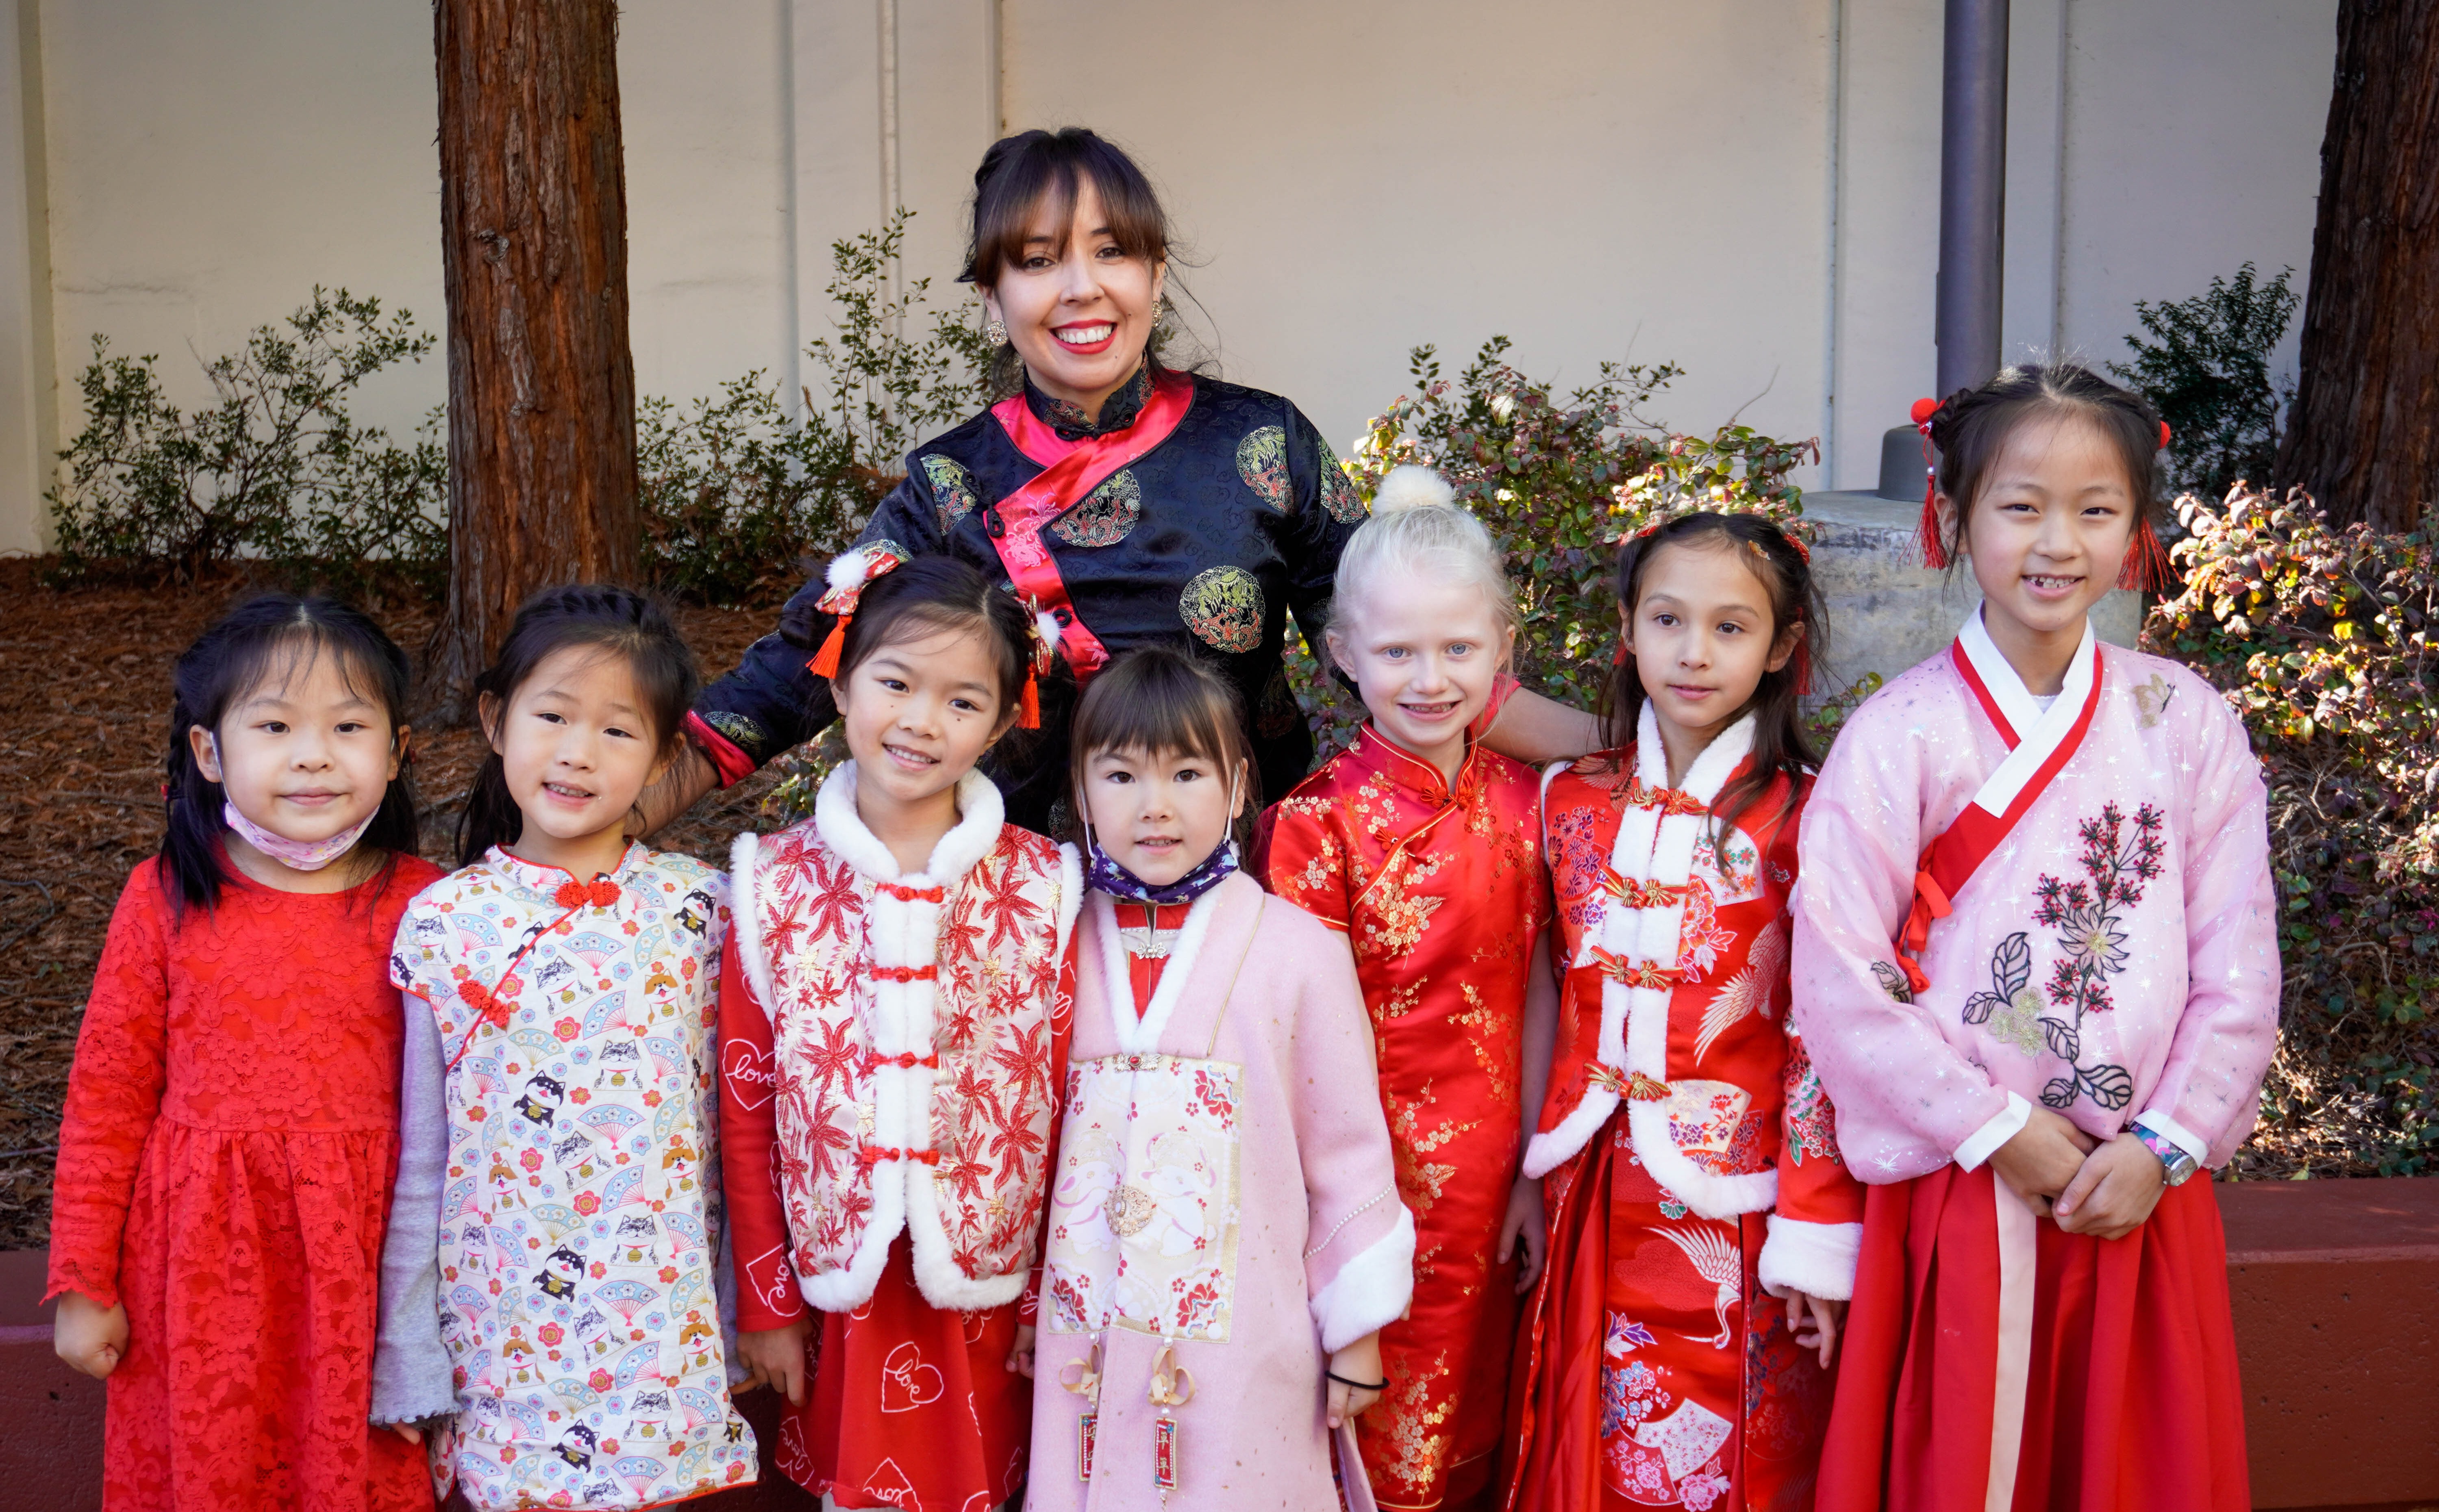 Seven elementary school girls wearing traditional red dresses for luck in the new year.